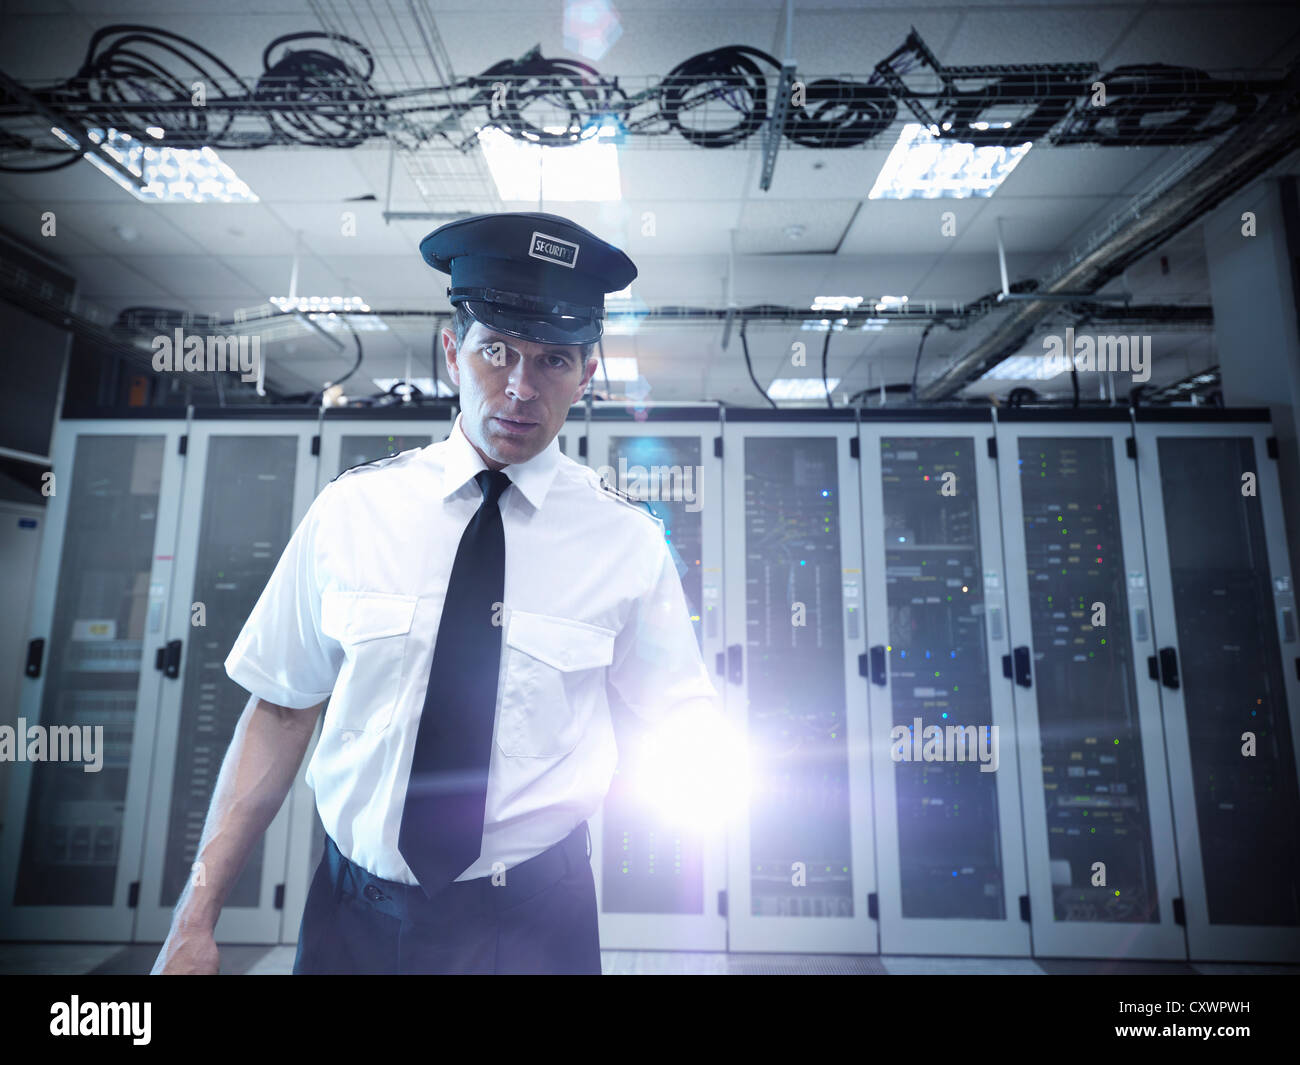 Security guard standing in server room Banque D'Images